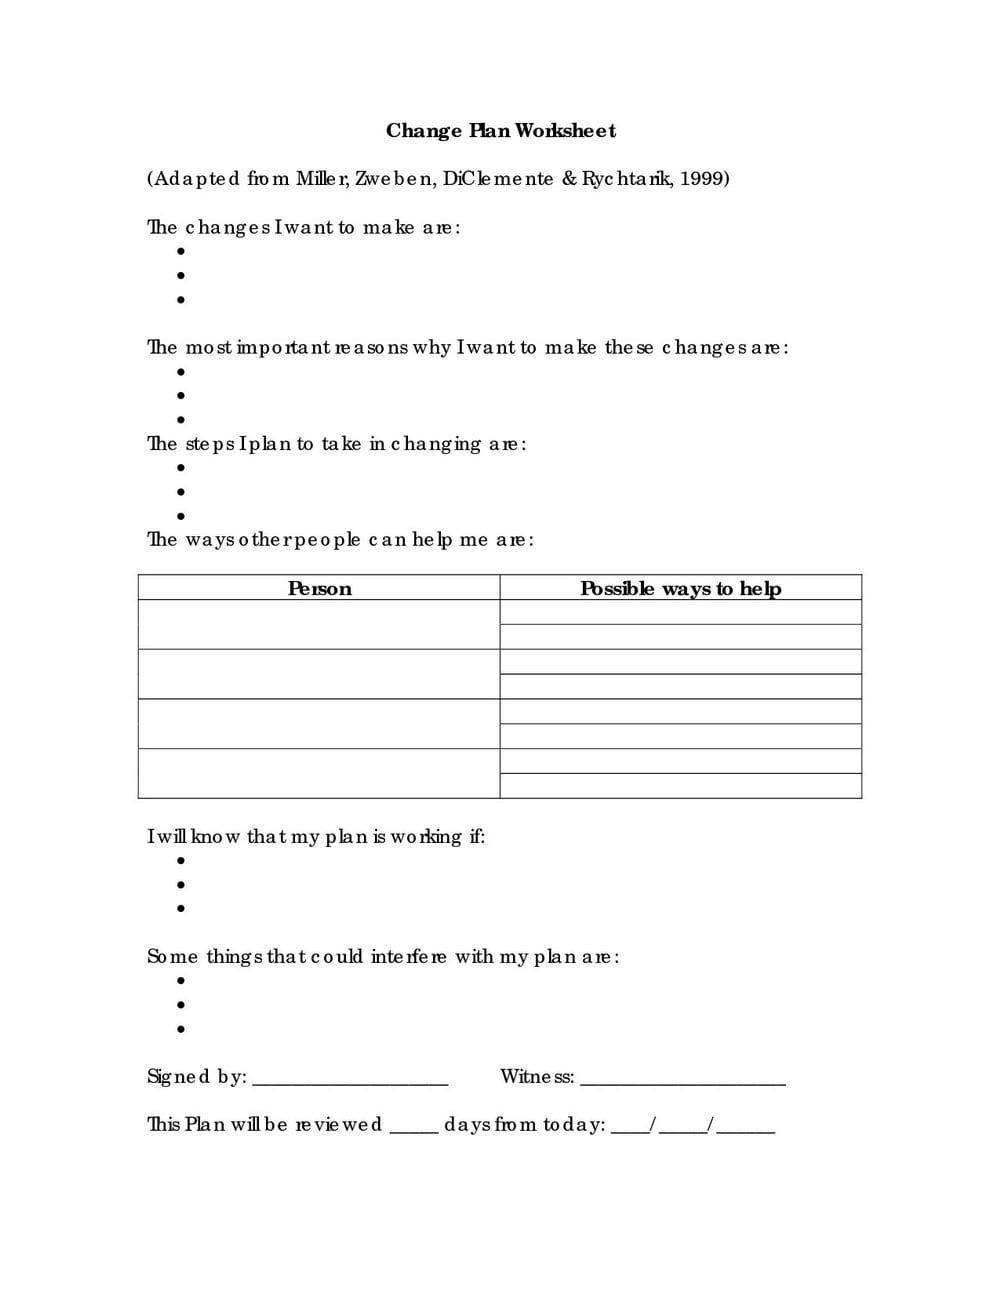 Drug Abuse Worksheets  Universal Network Throughout Substance Abuse Worksheets For Adults Pdf